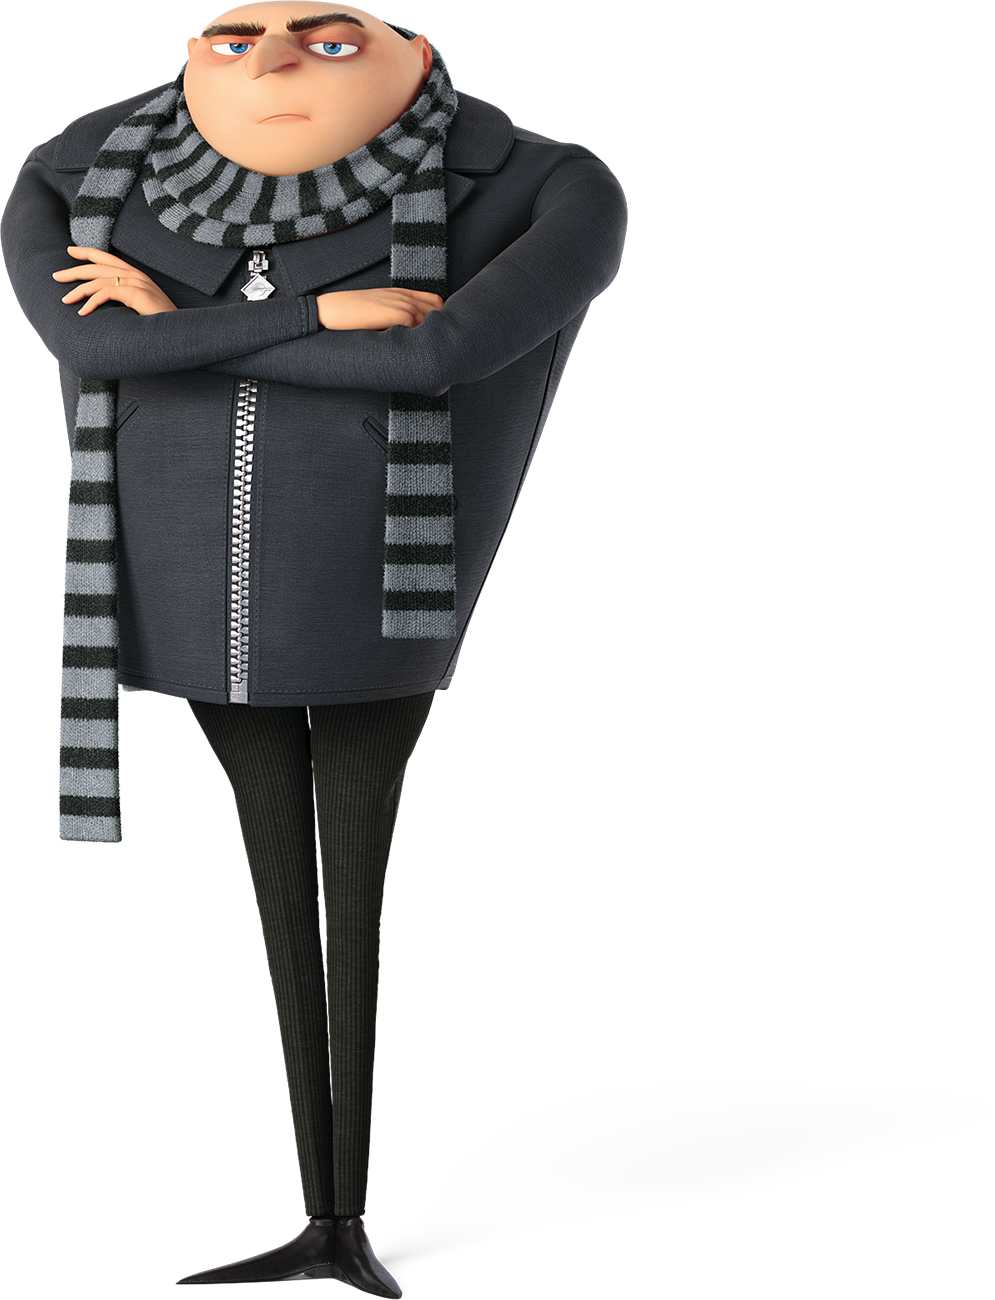 Image - Gru despicable me 3.png | The Parody Wiki | FANDOM powered by Wikia